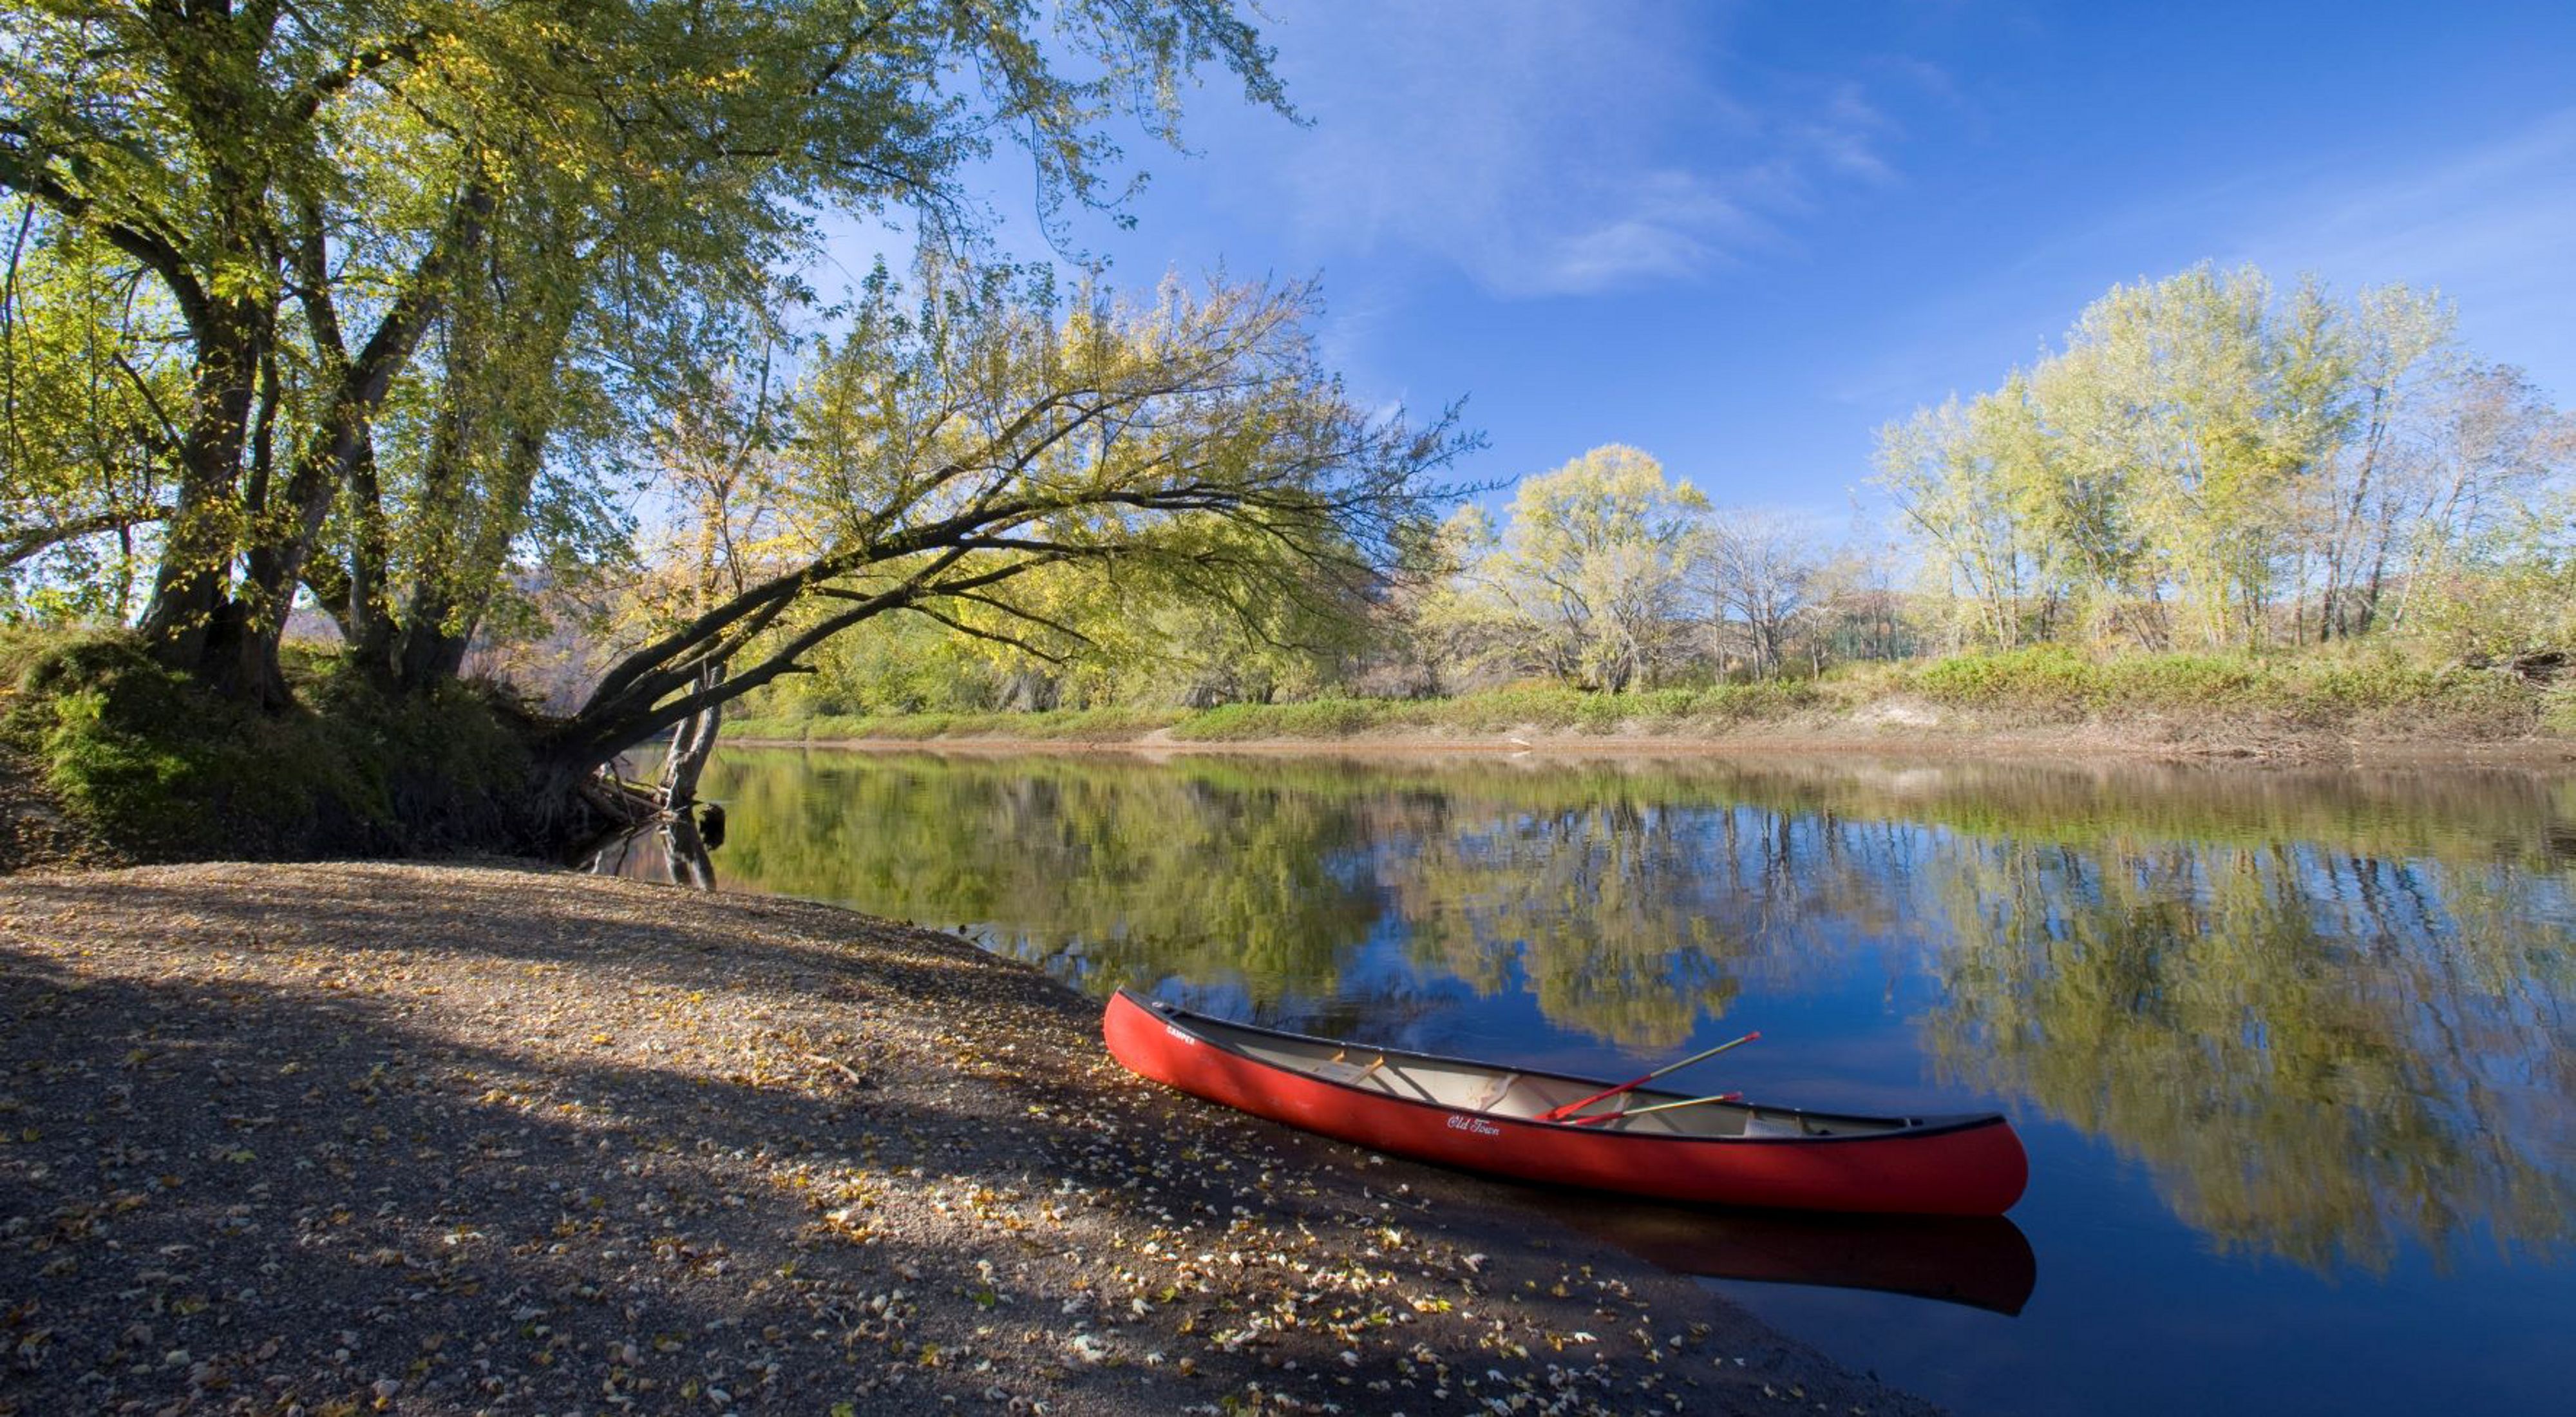 A red canoe rests on the shore of a calm river lined with trees.